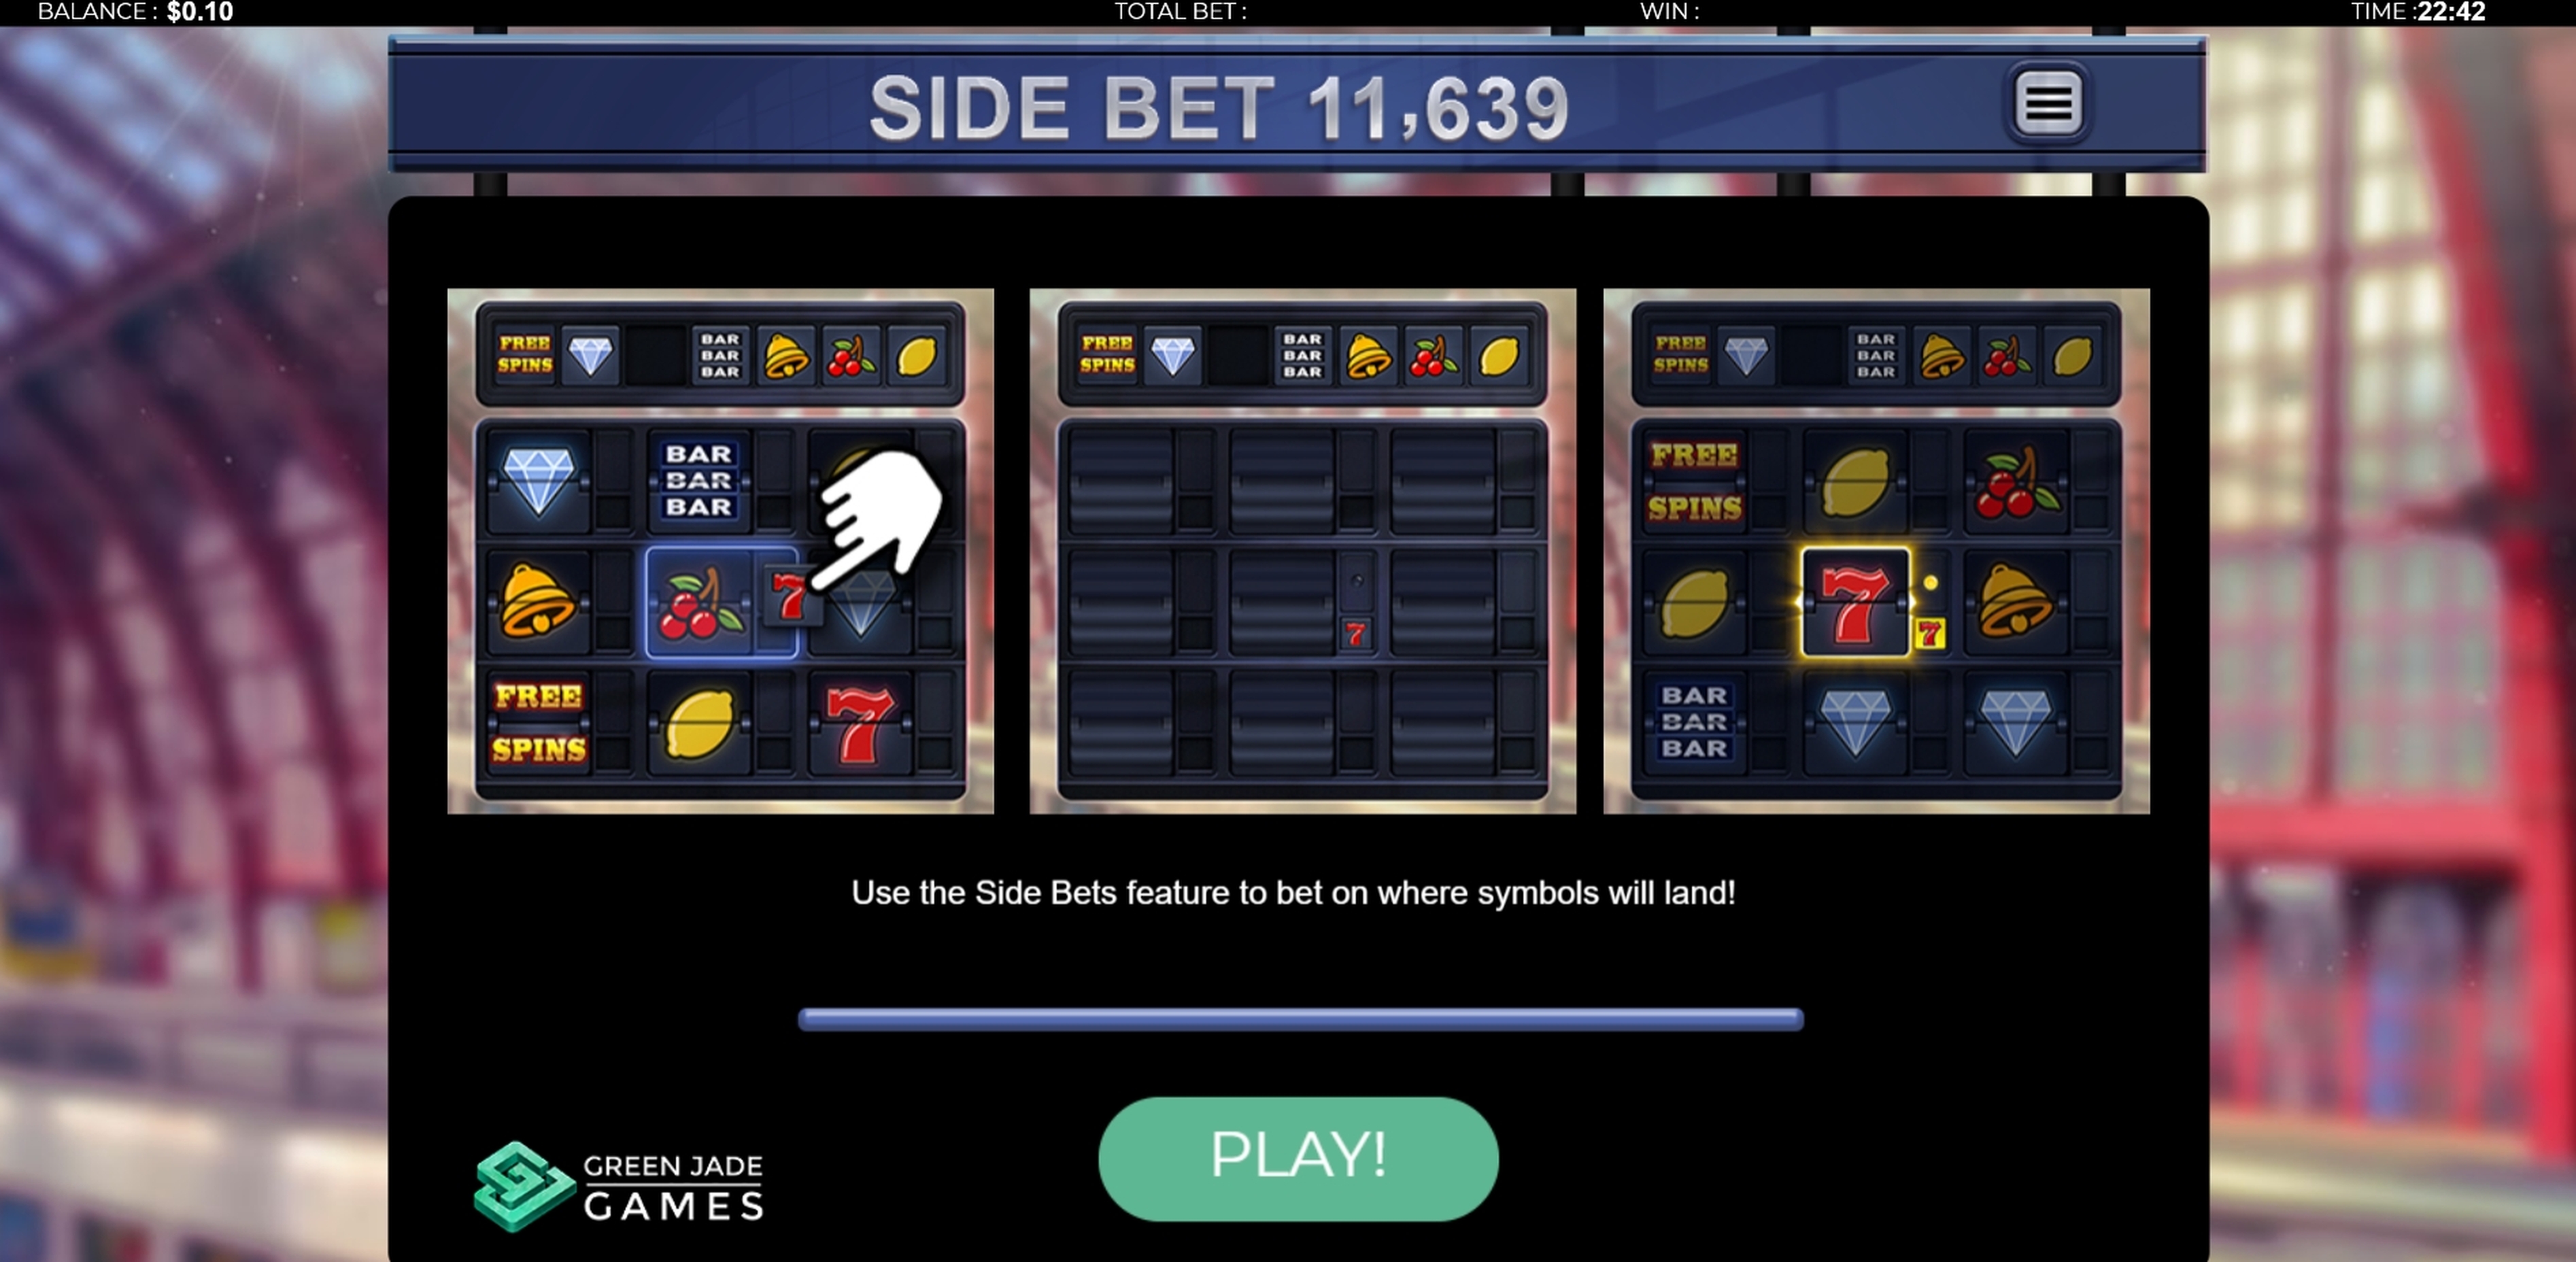 Play Side Bet 11K Free Casino Slot Game by Green Jade Games